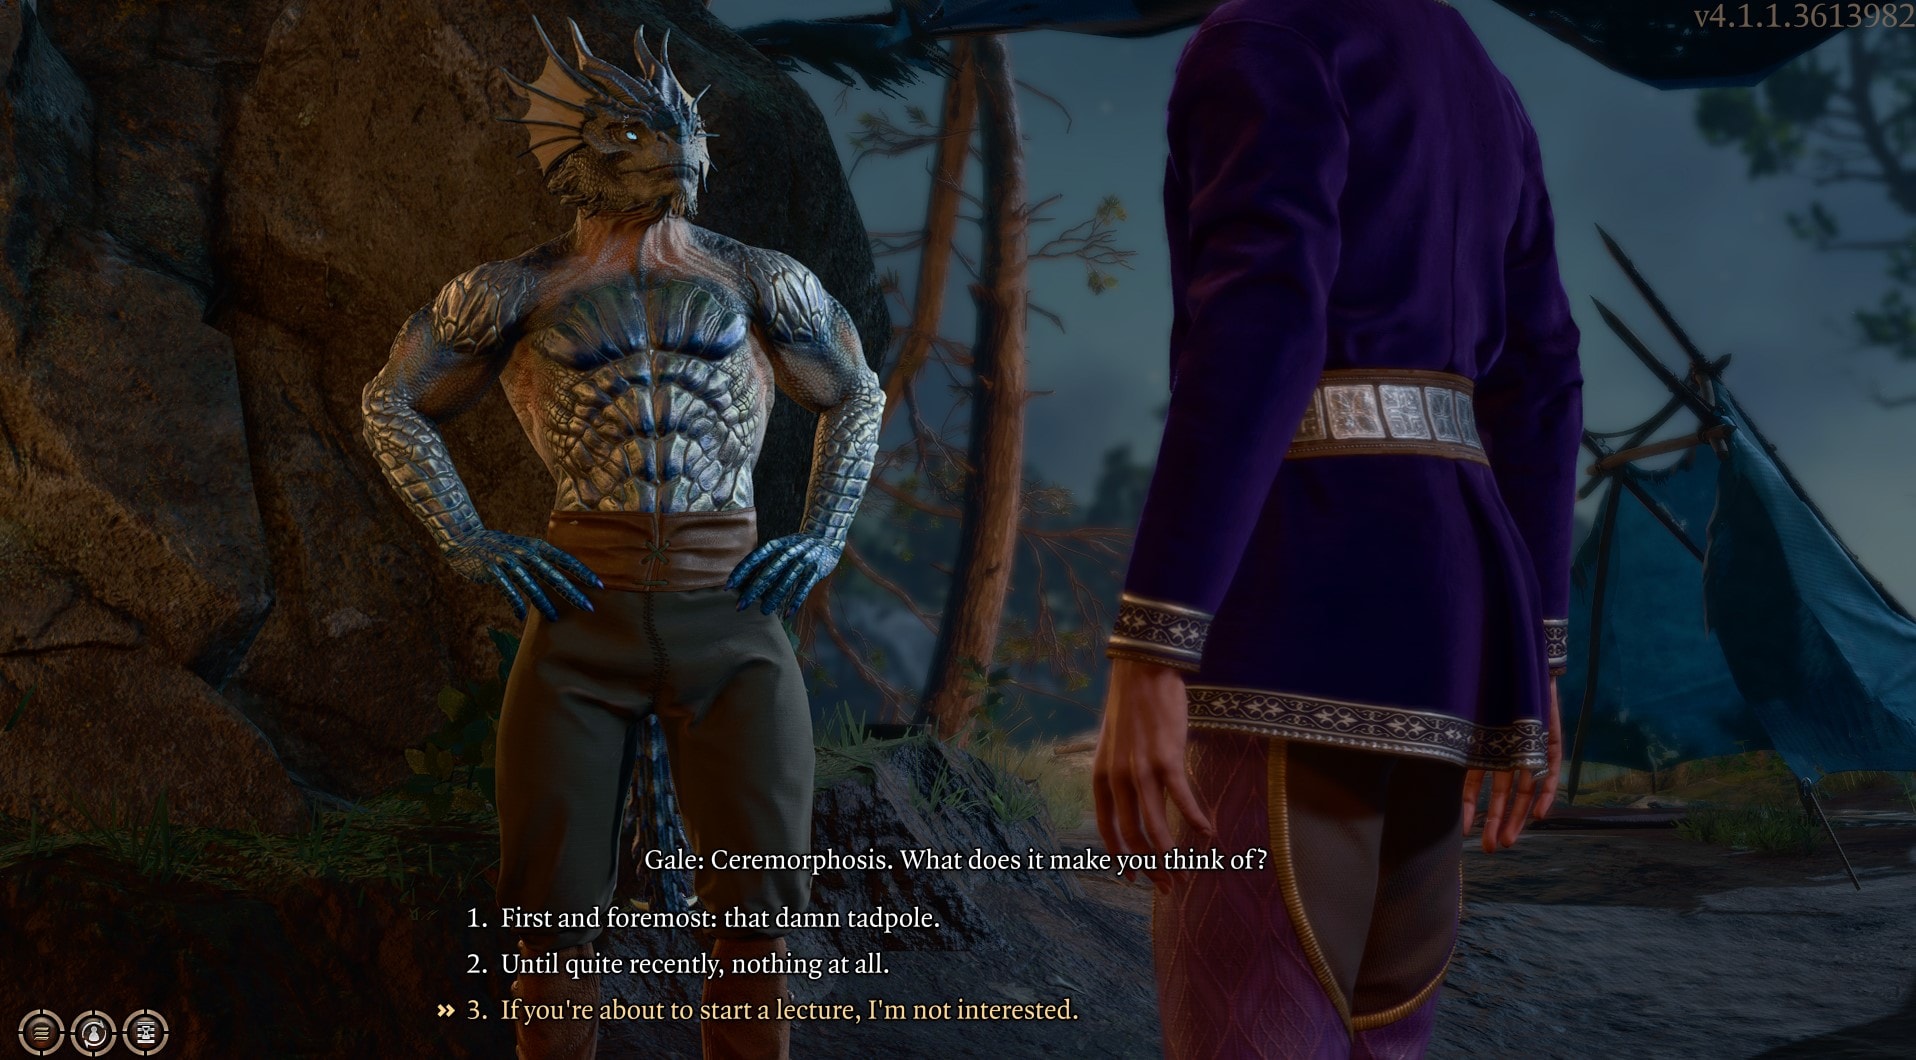 Baldur's Gate 3 screenshot of Tav the Dragonborn talking to the wizard Gale. Tav is shirtless, Gale has his back to the camera. They are discussing Ceremorphosis, the process of becoming a mind flayer